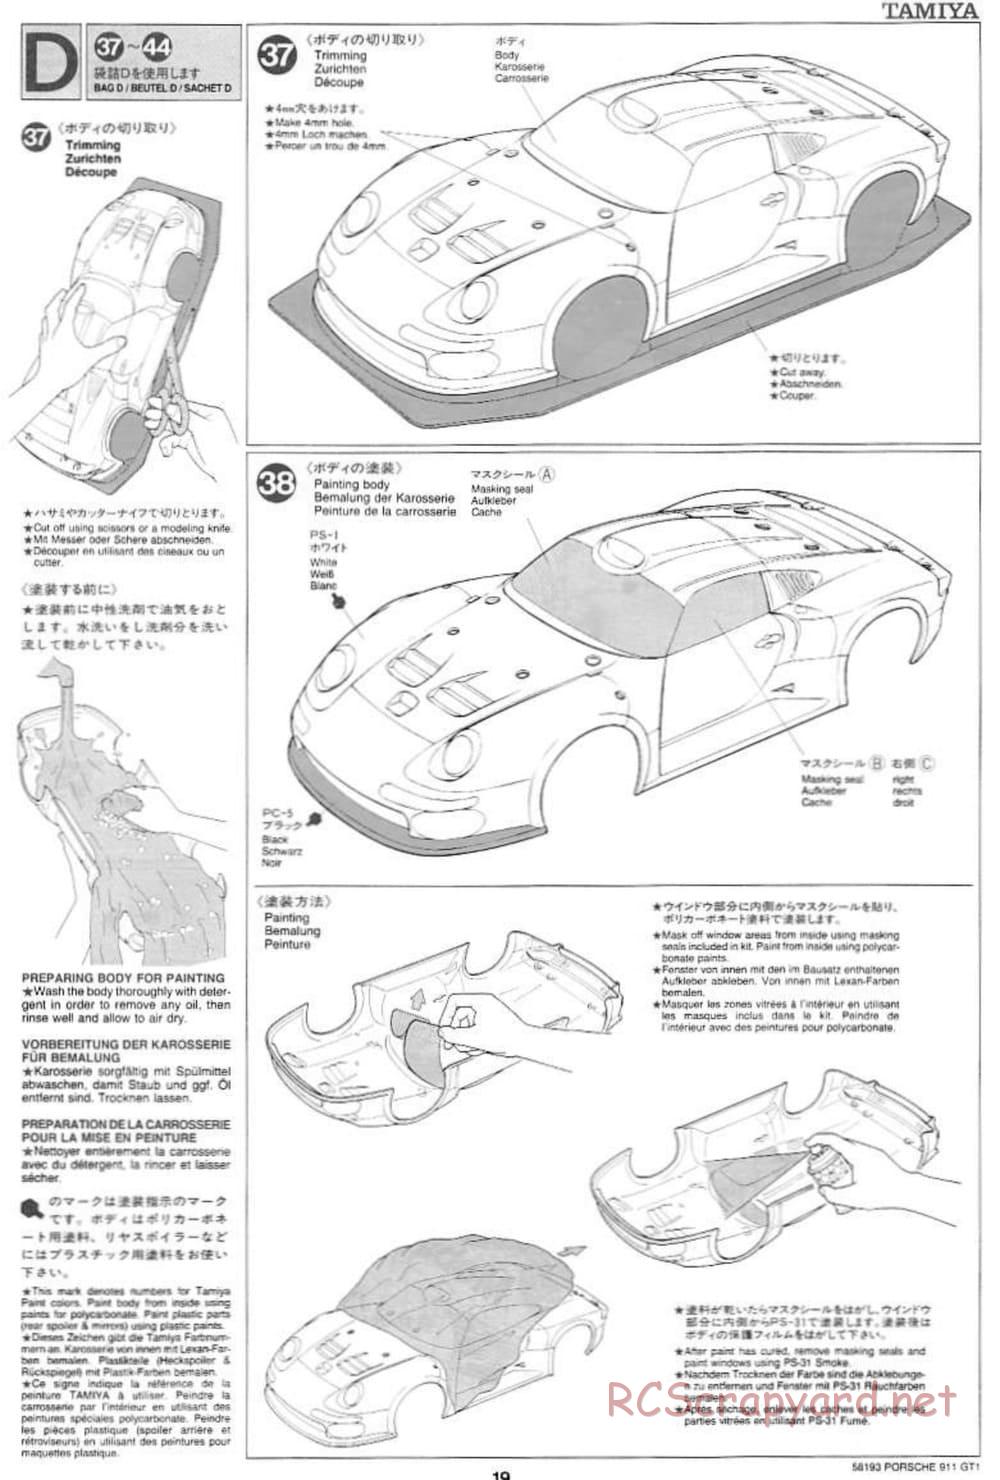 Tamiya - Porsche 911 GT1 - TA-03RS Chassis - Manual - Page 19